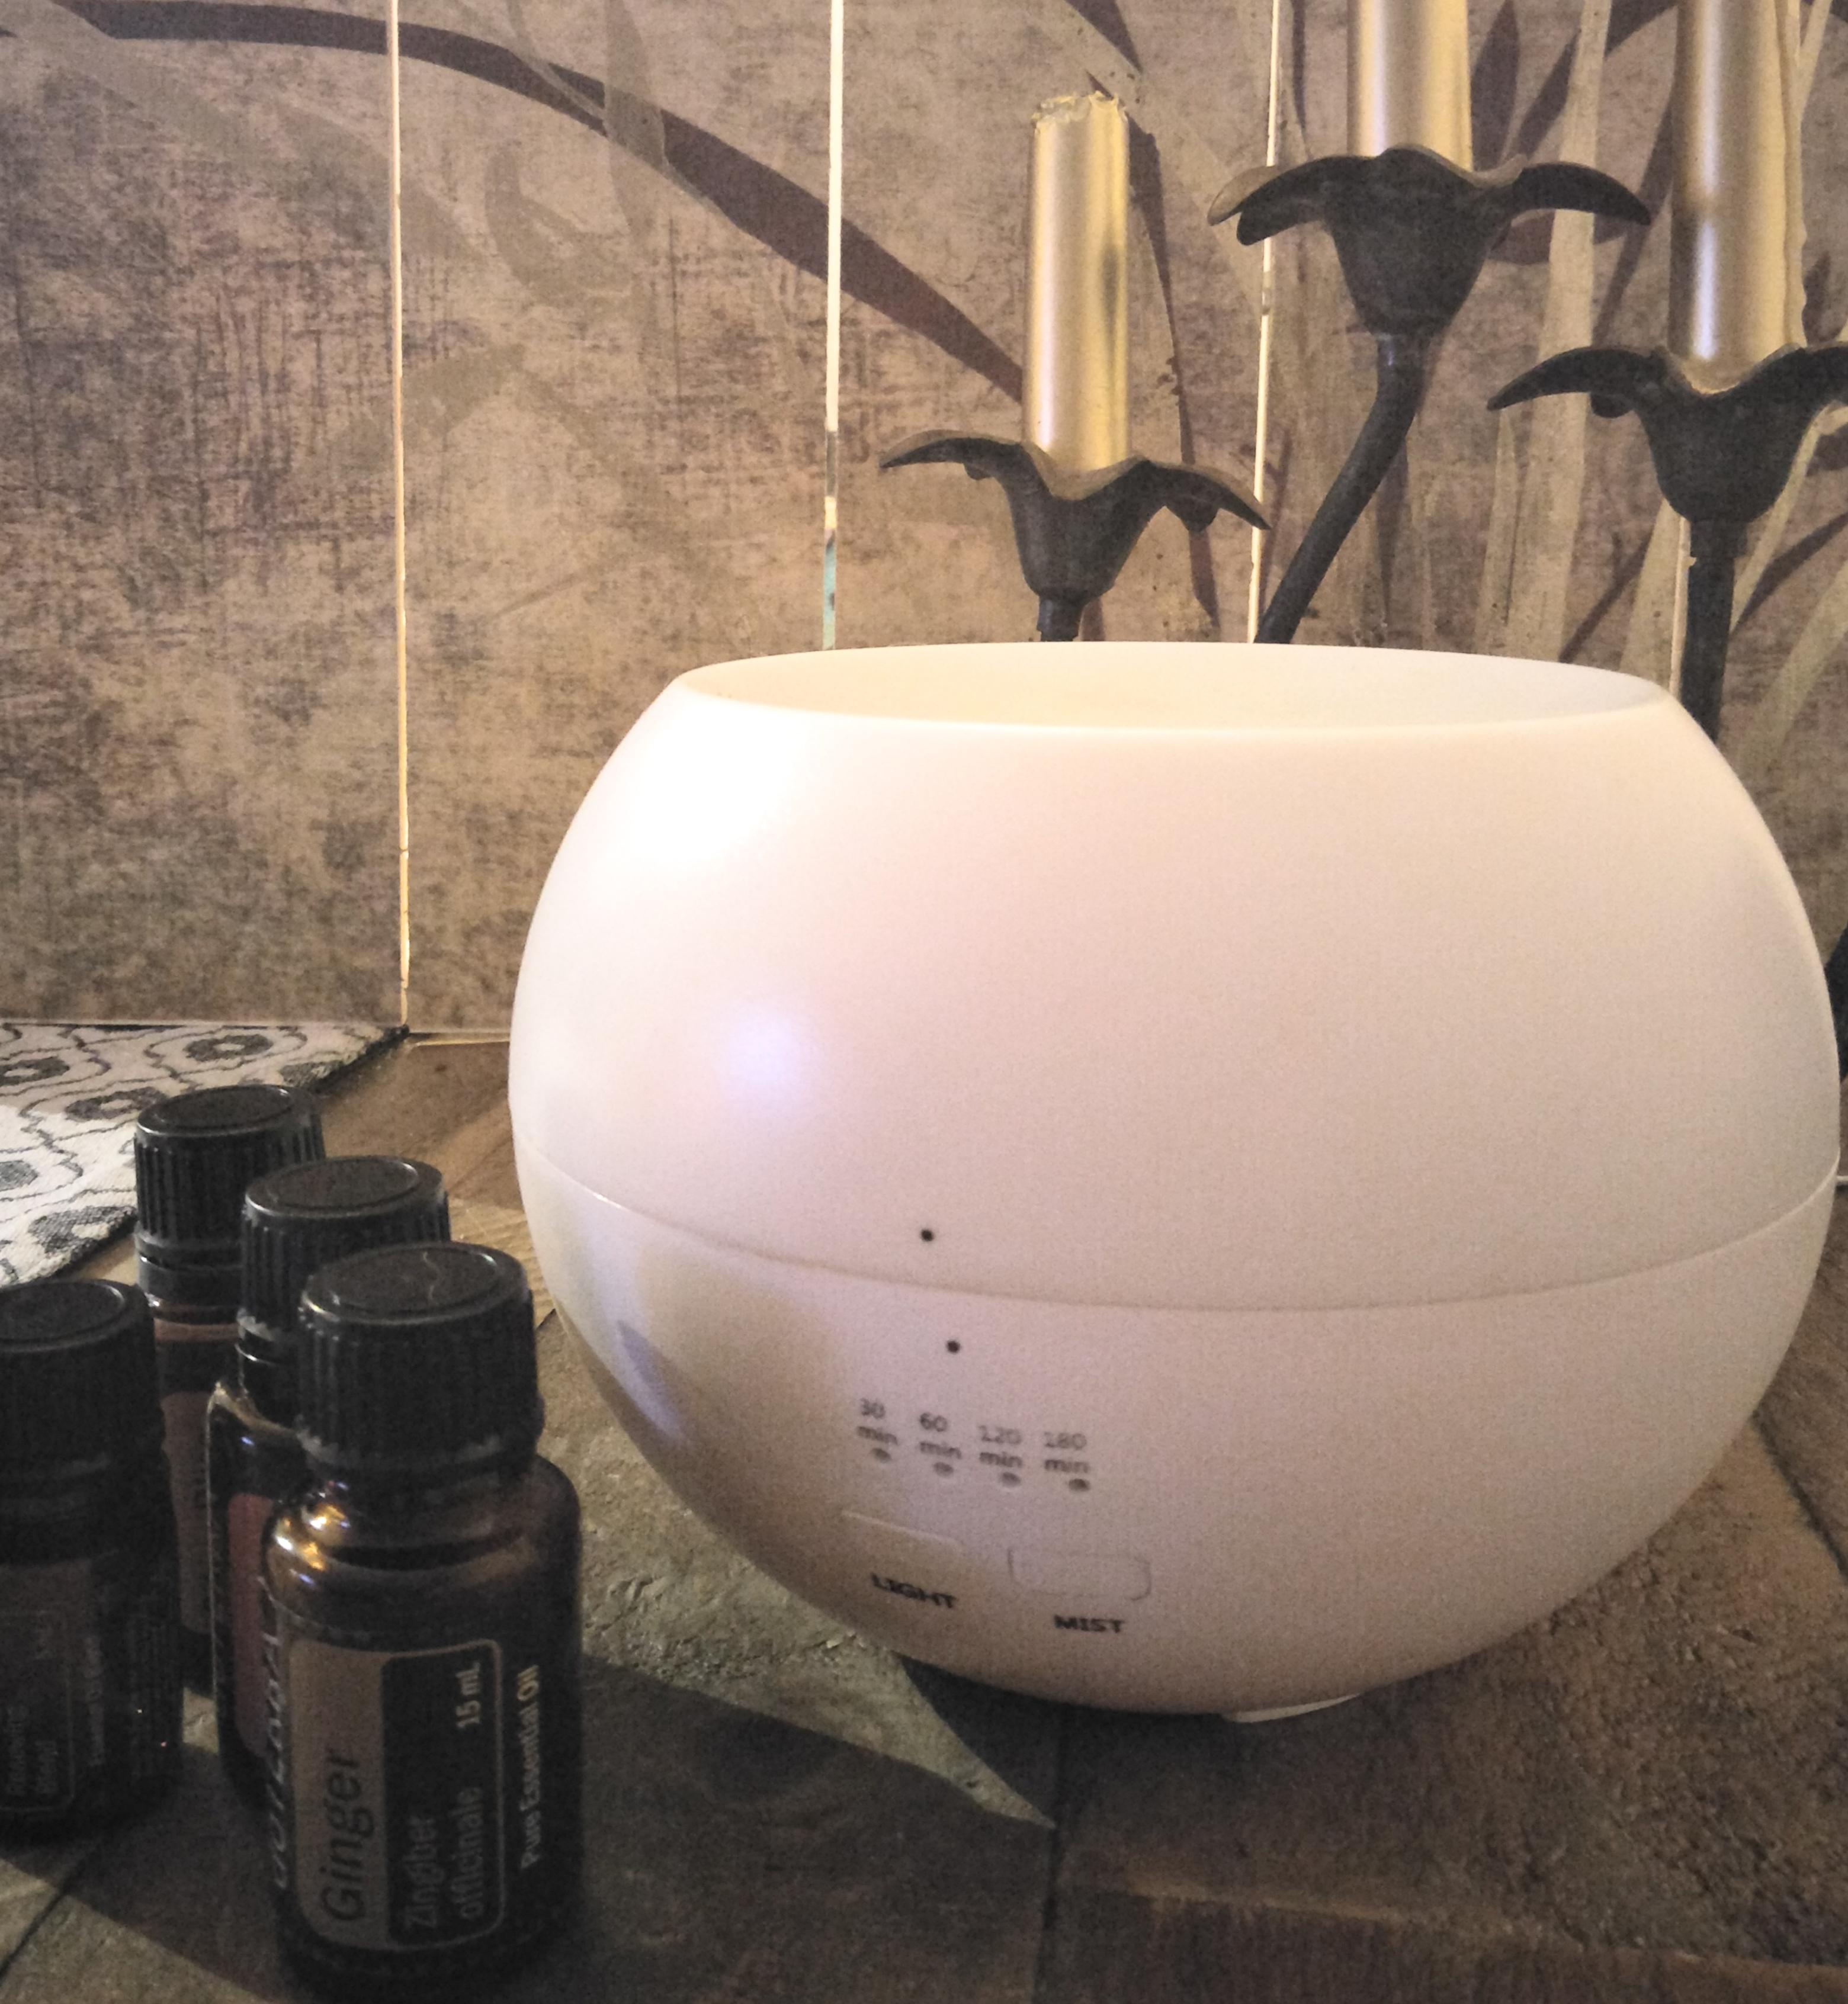 A Review of Kmart’s Ultrasonic Aroma Diffuser